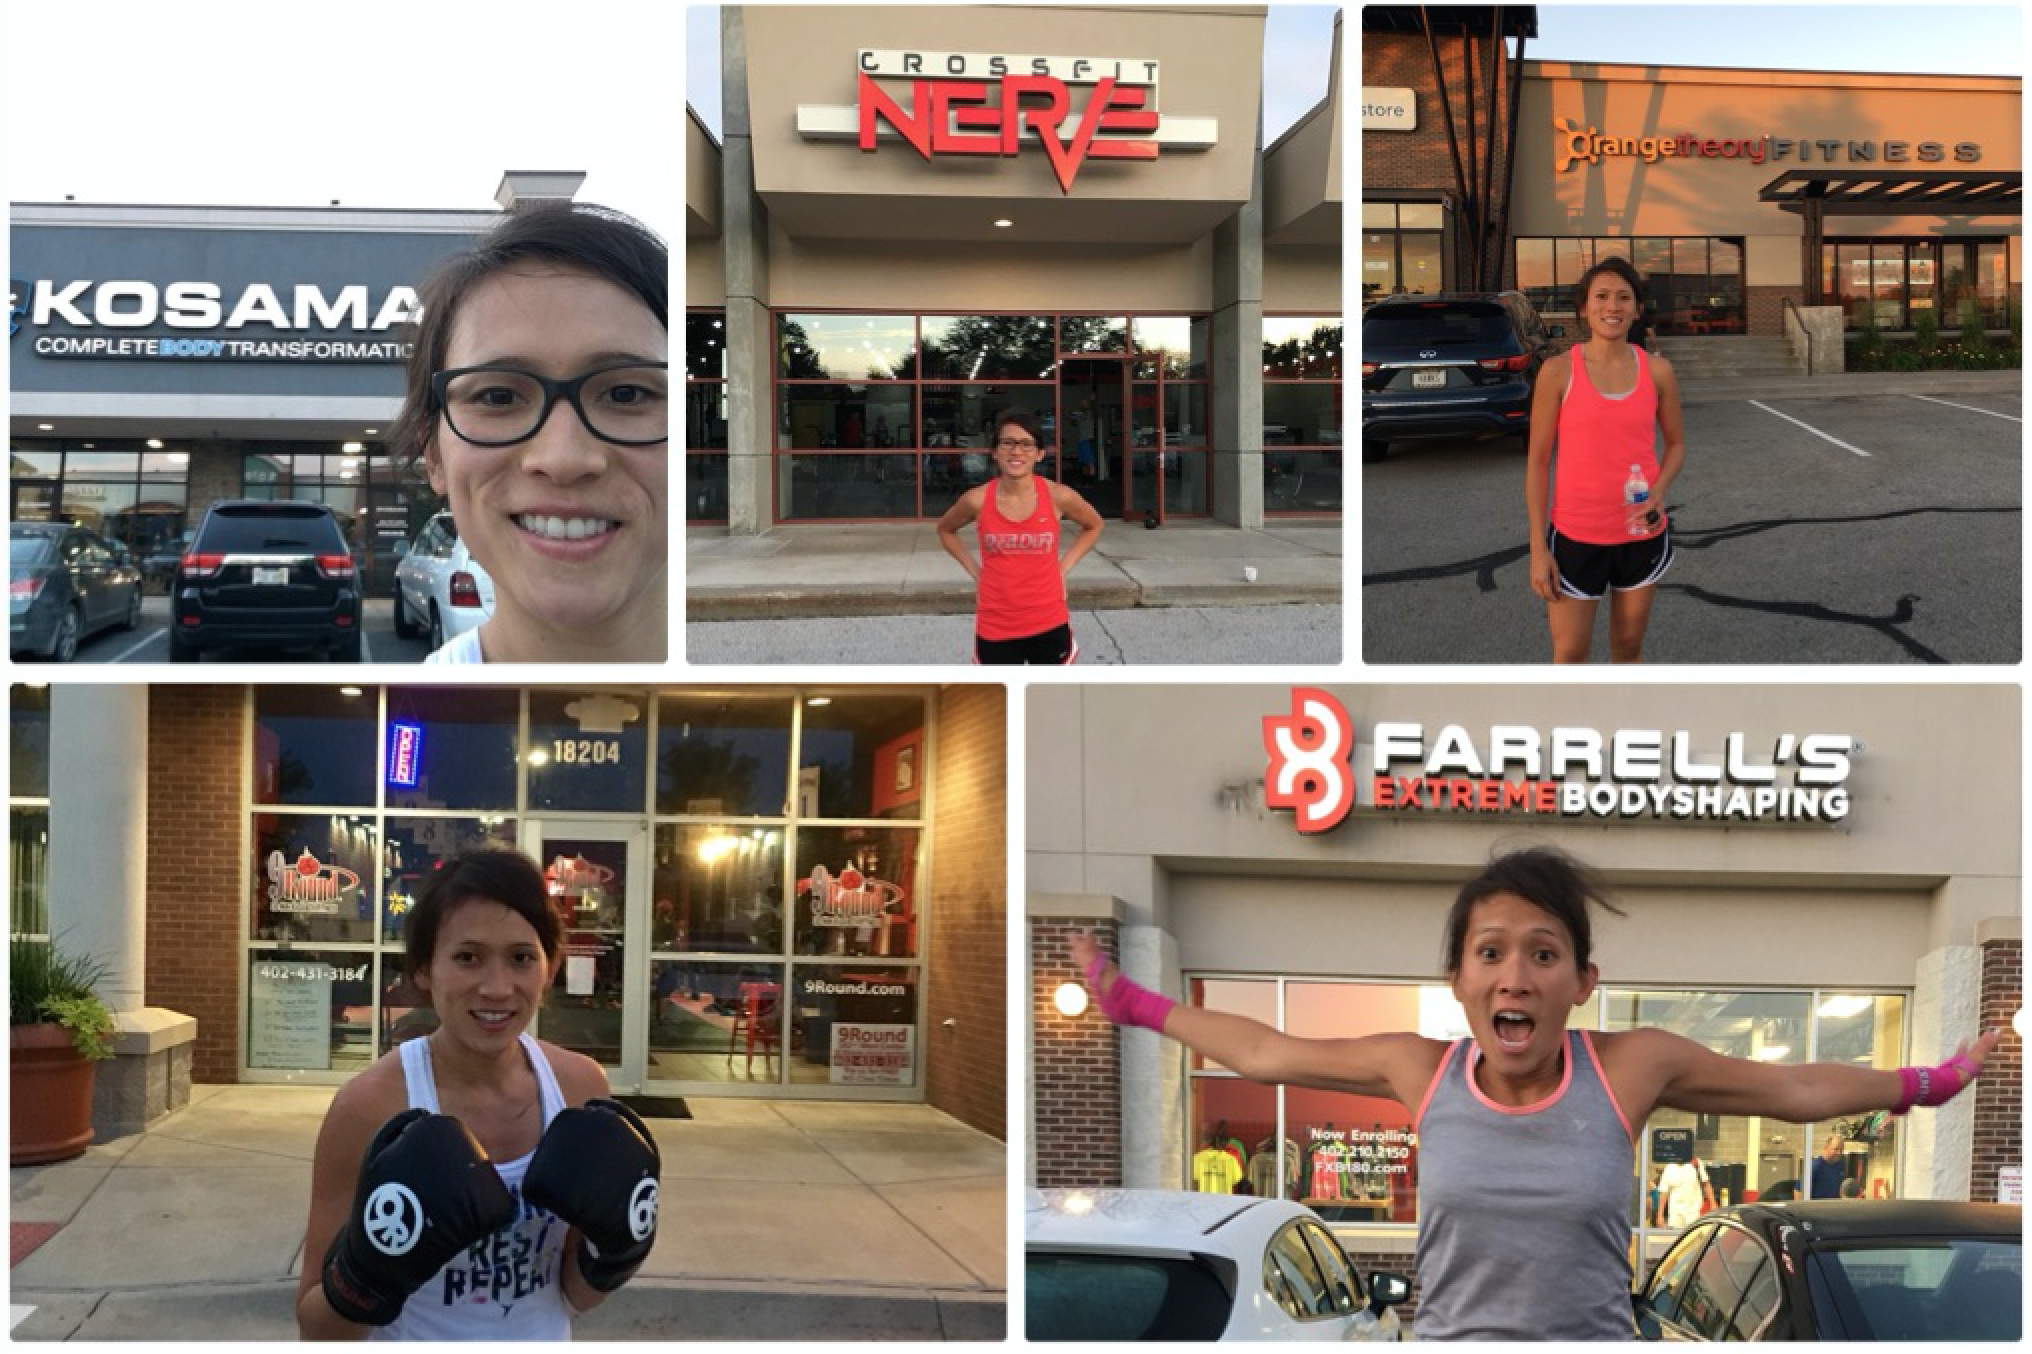 7 OTF events ideas  orange theory workout, networking event